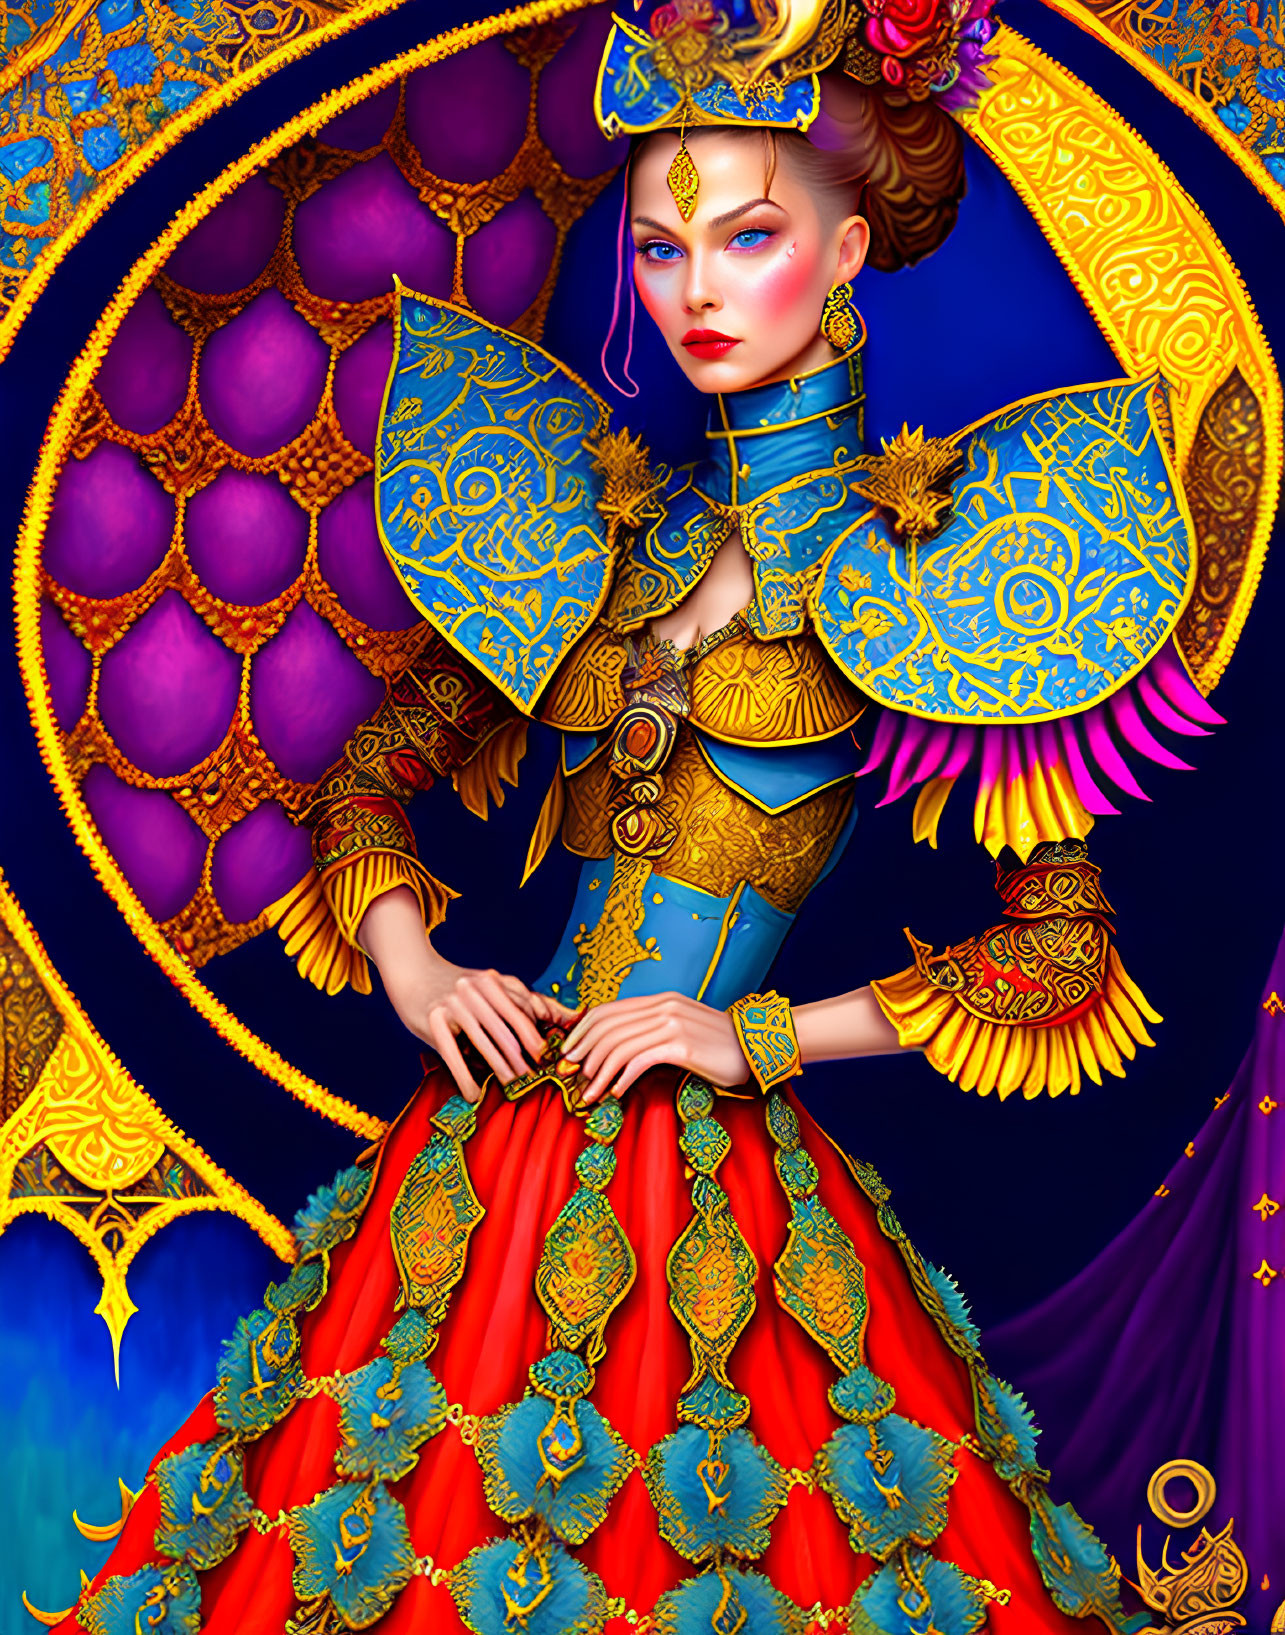 Regal woman in ornate attire with gold accents on blue and purple backdrop